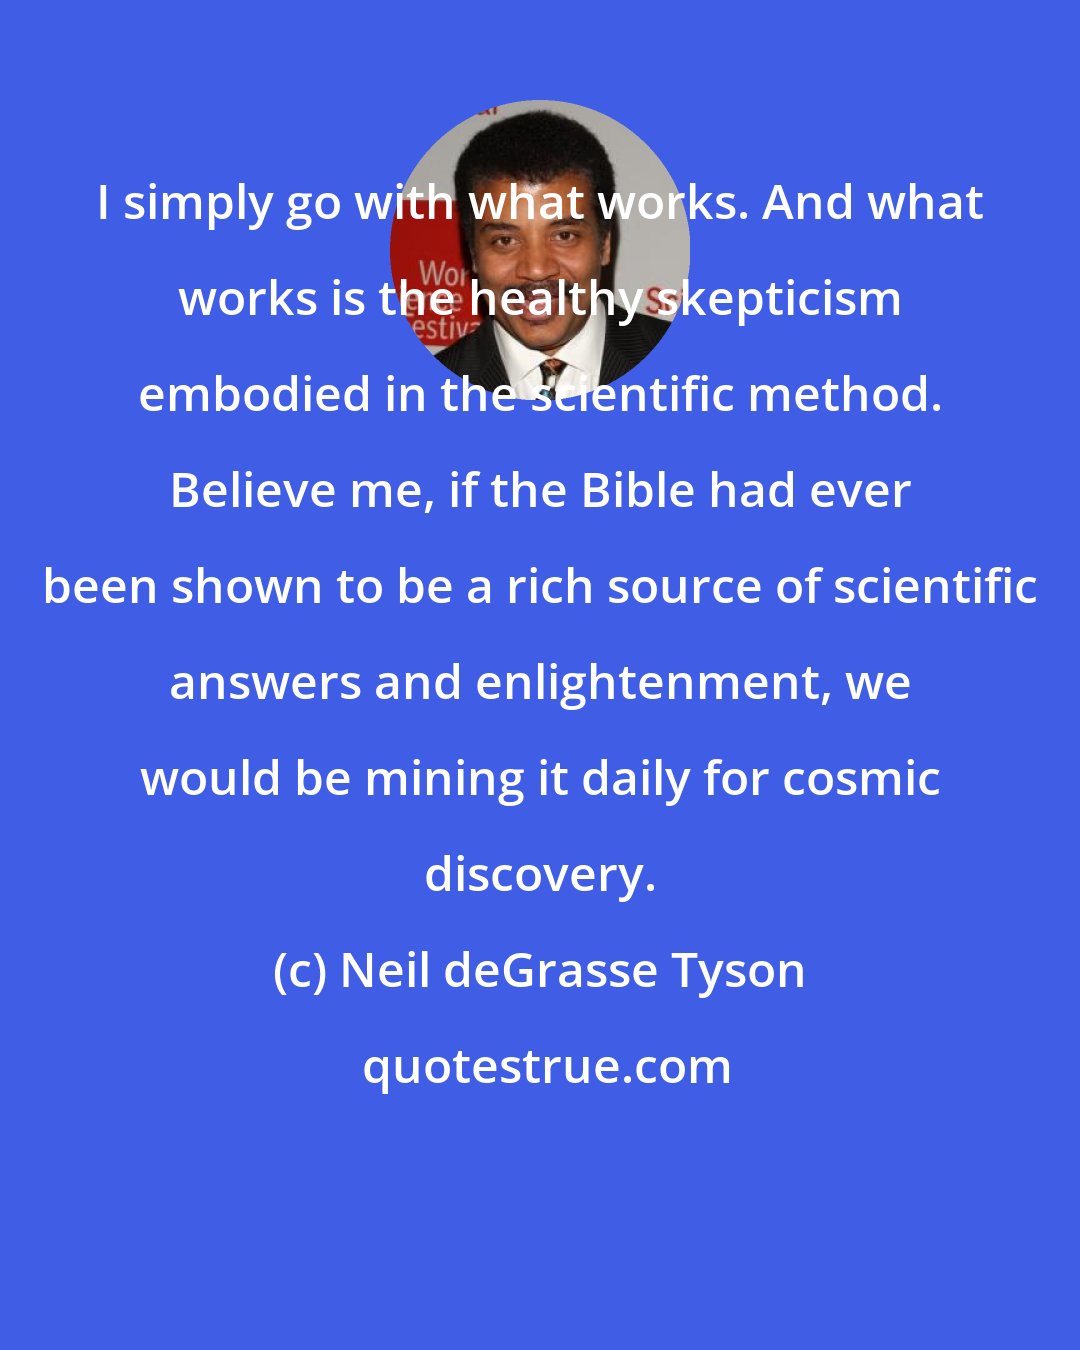 Neil deGrasse Tyson: I simply go with what works. And what works is the healthy skepticism embodied in the scientific method. Believe me, if the Bible had ever been shown to be a rich source of scientific answers and enlightenment, we would be mining it daily for cosmic discovery.